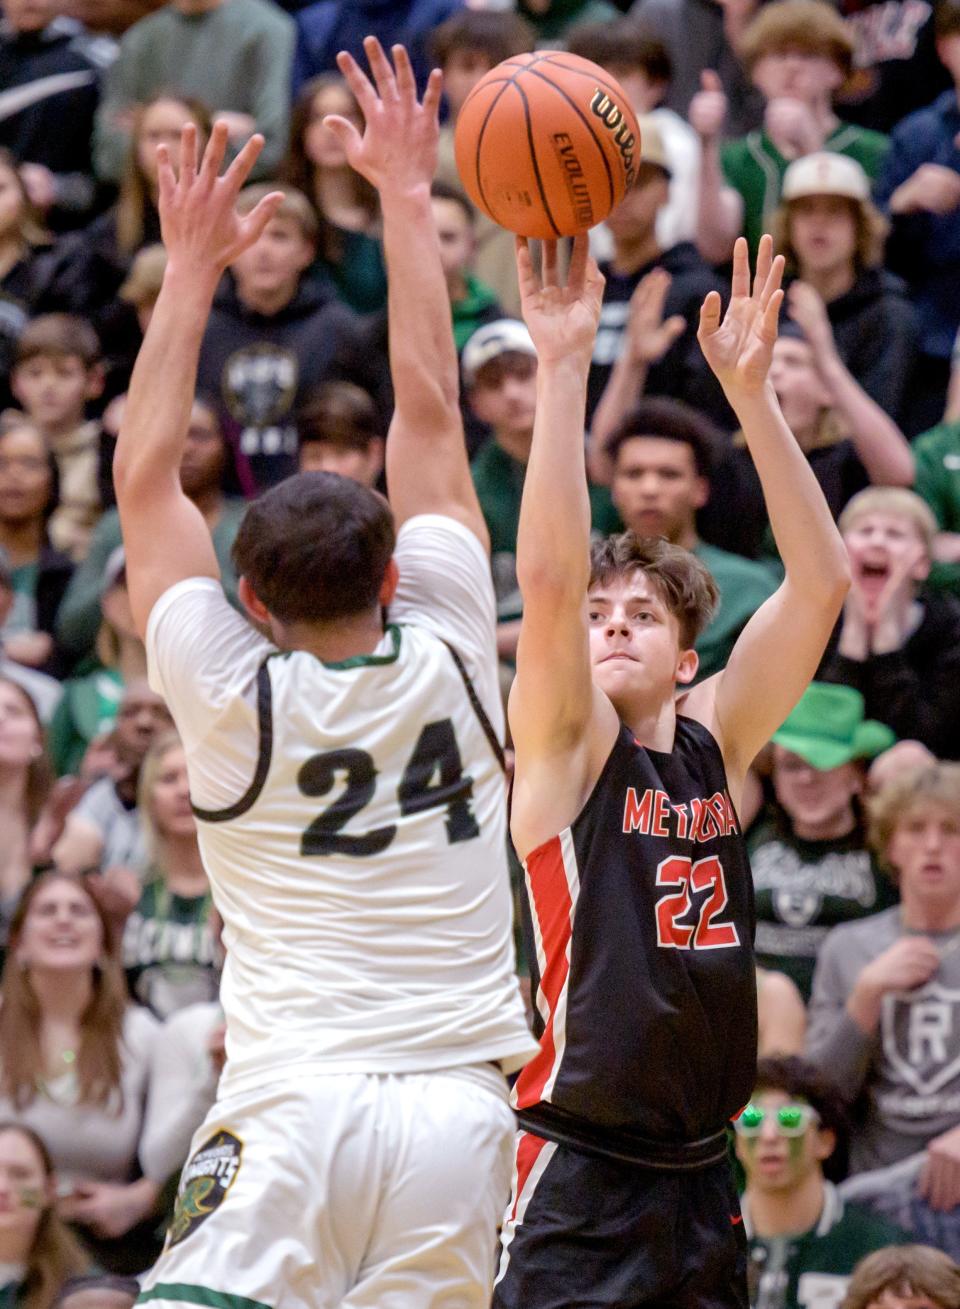 Metamora's Tyson Swanson, right, shoots over Richwoods' Sabri Qattum during their Class 3A sectional final Friday, March 3, 2023 at Galesburg High School. The Redbirds defeated the Knights 65-60.